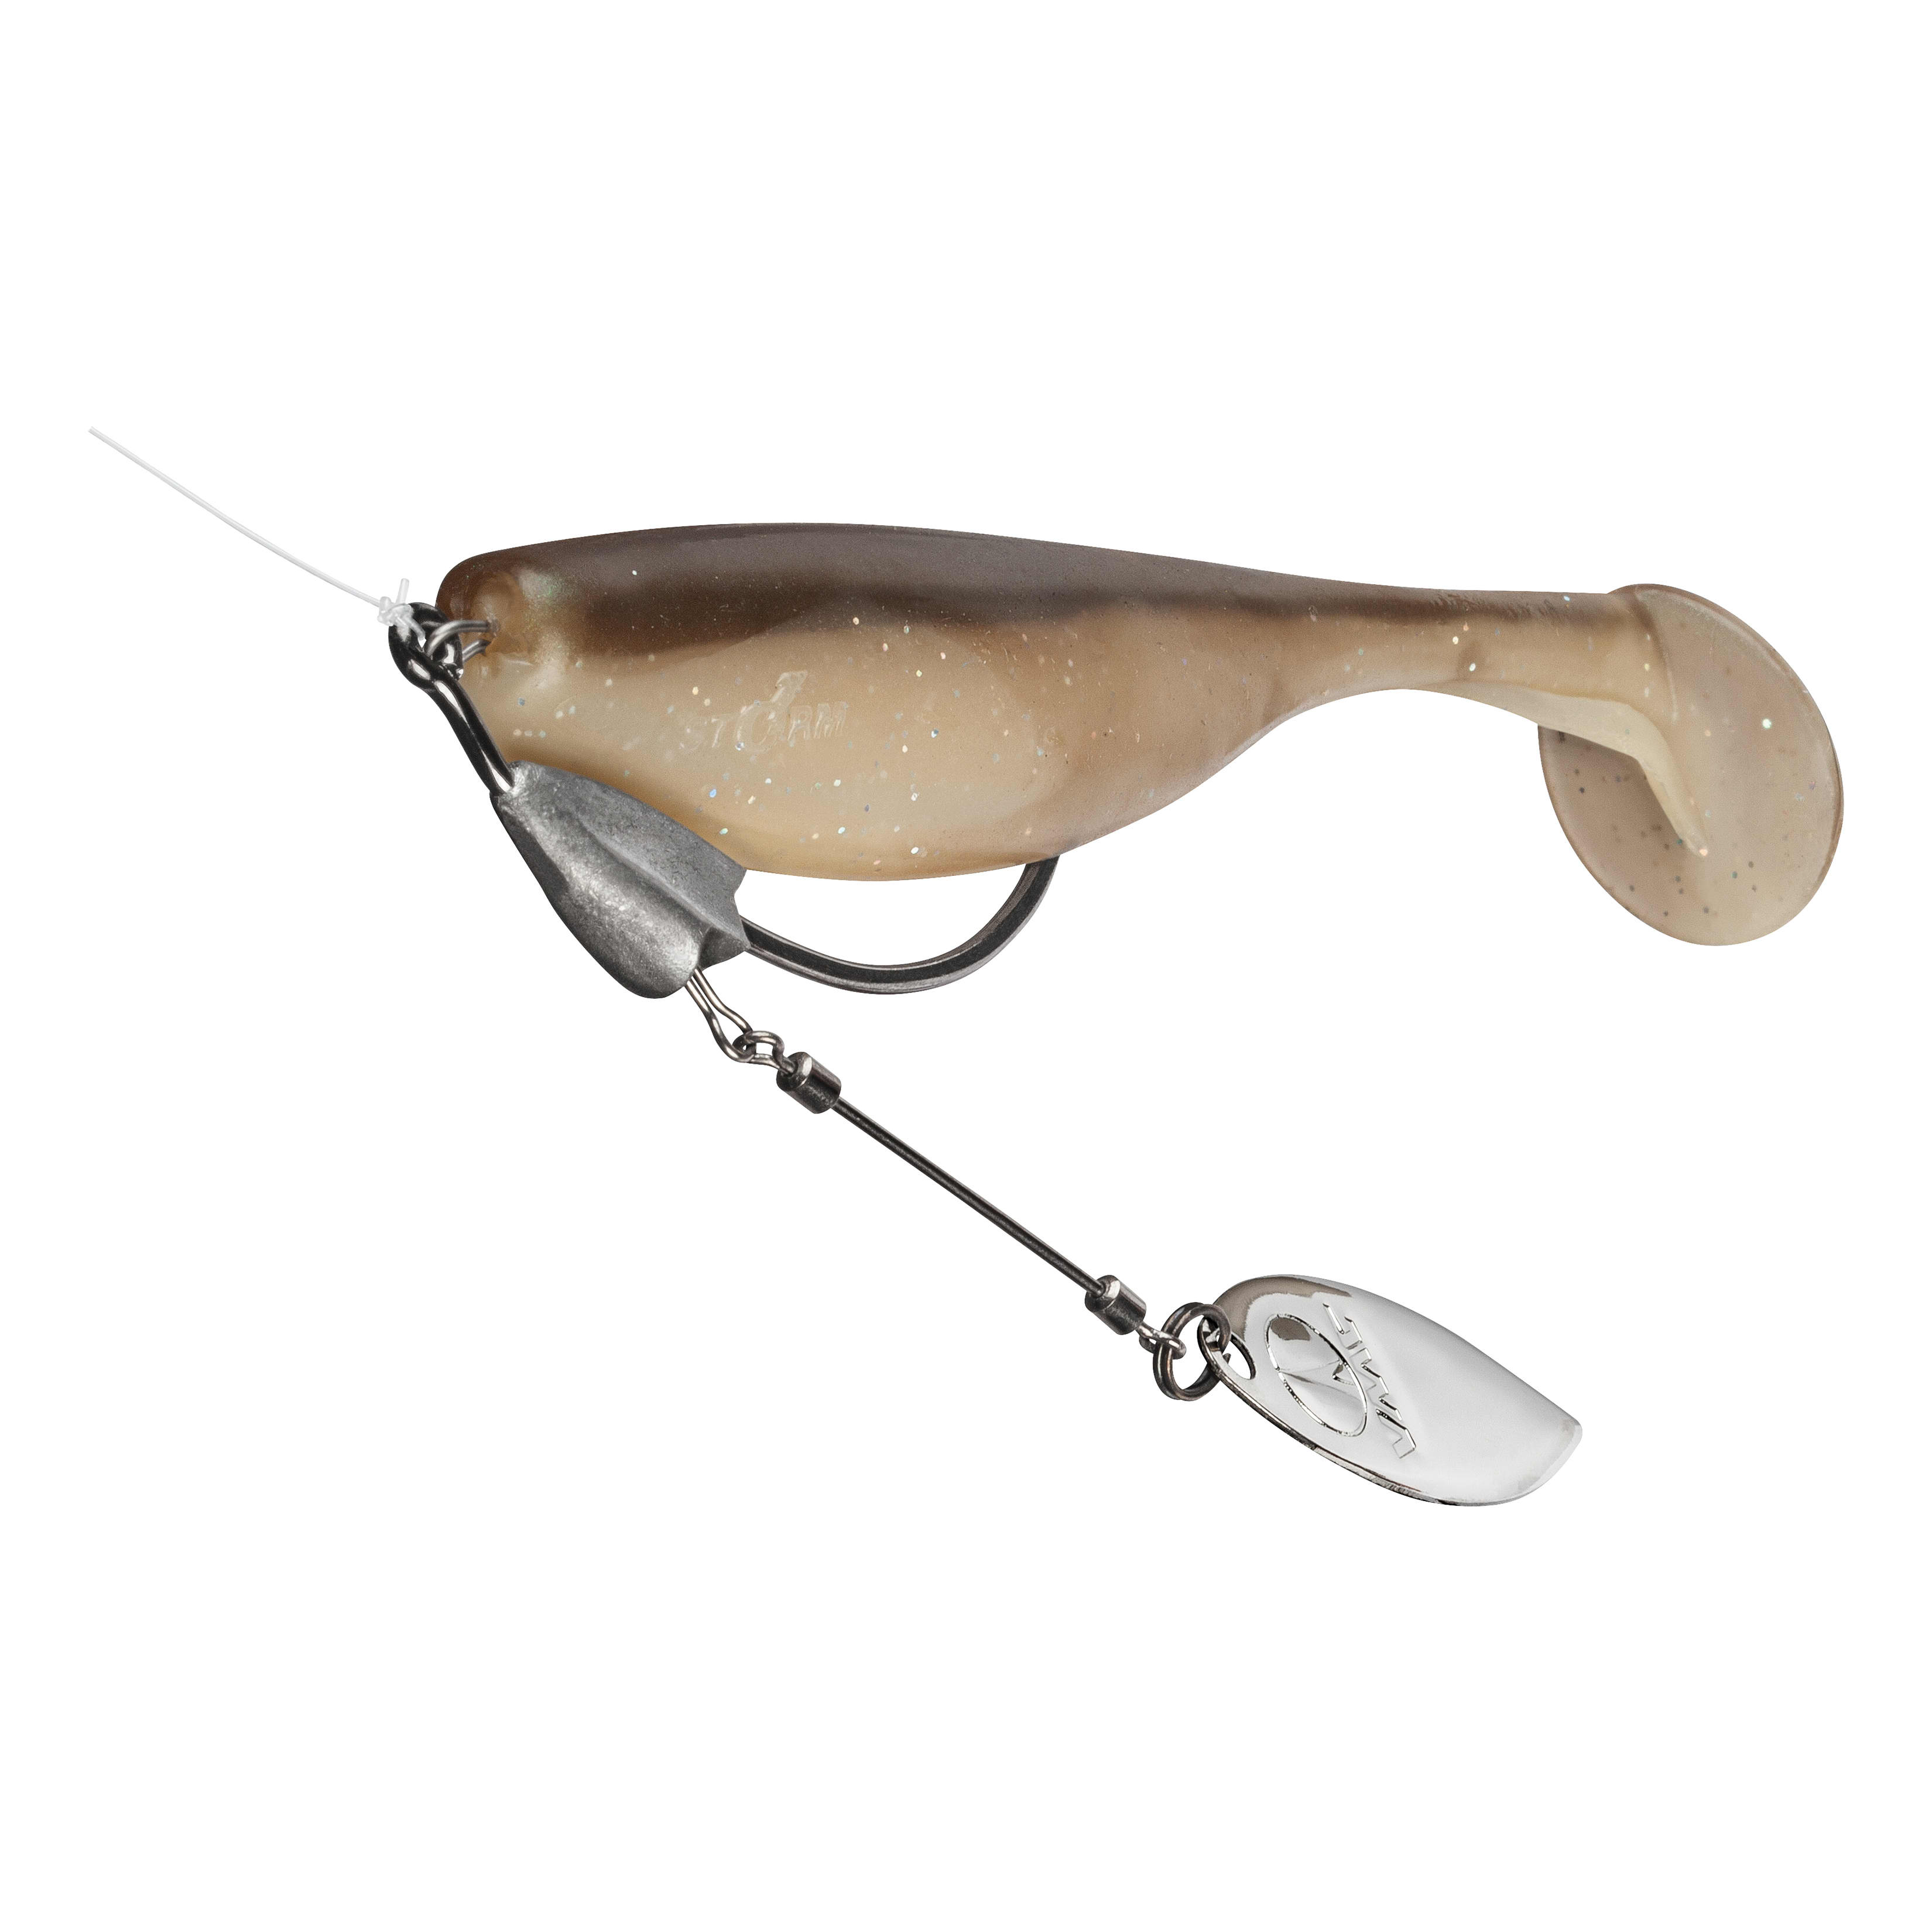 VMC® Heavy-Duty Weighted Willow Swimbait Hook - rigged